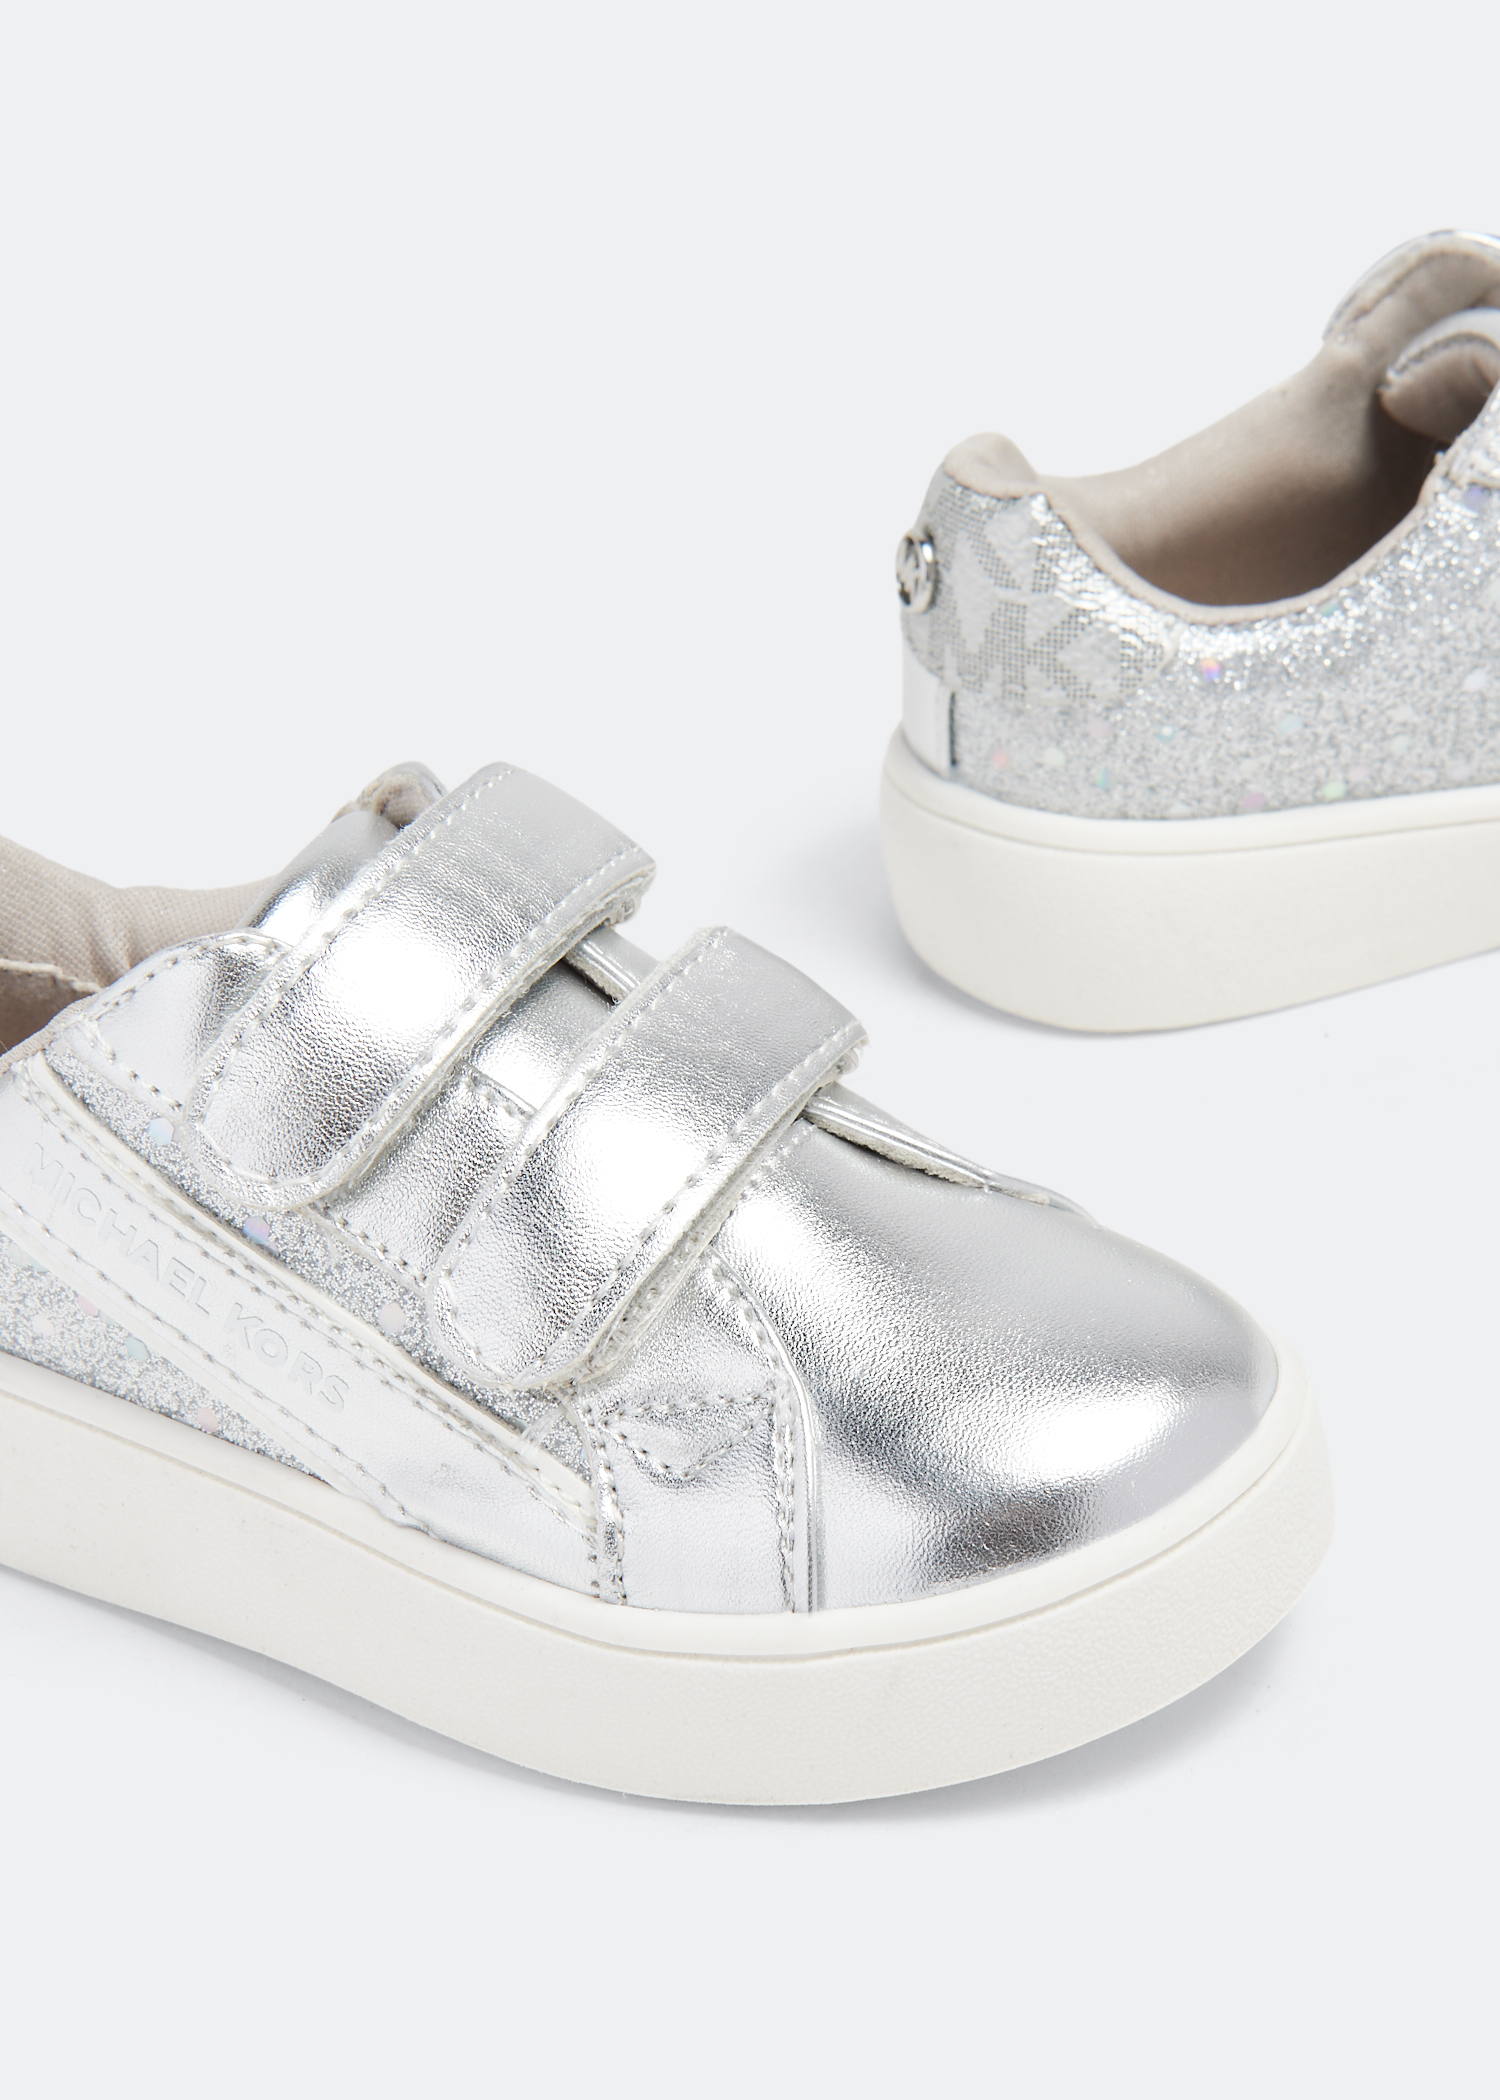 Stylish Michael Kors White/Silver Sneakers - Limited Time Offer!